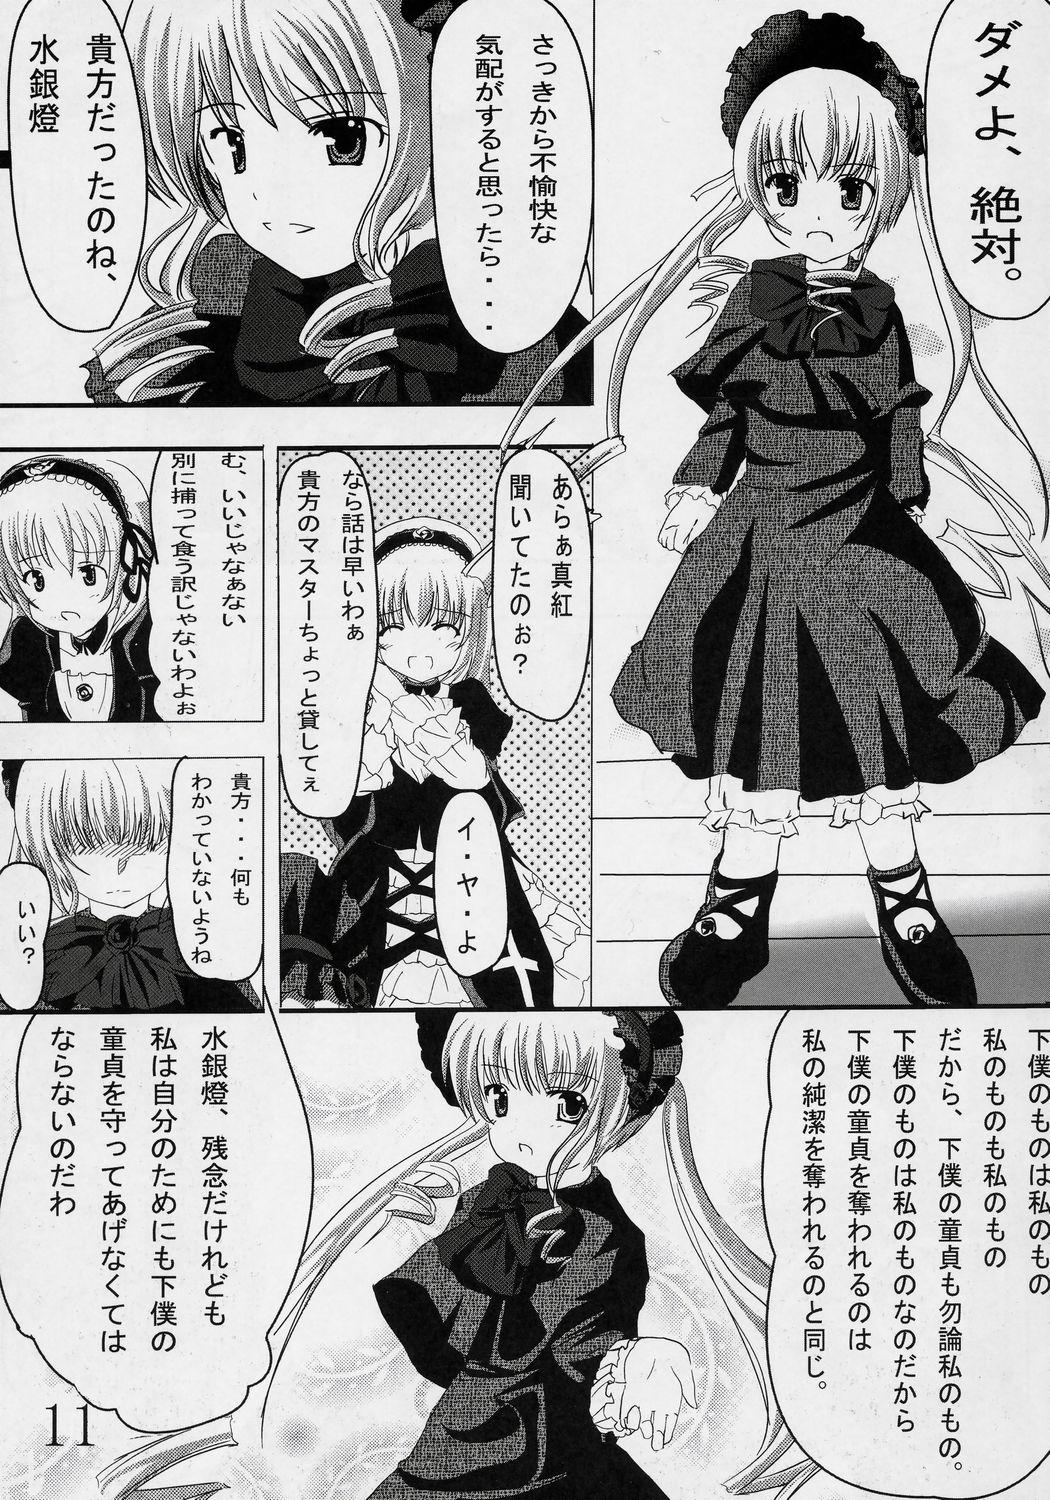 Compilation Erica - Rozen maiden Freaky - Page 10